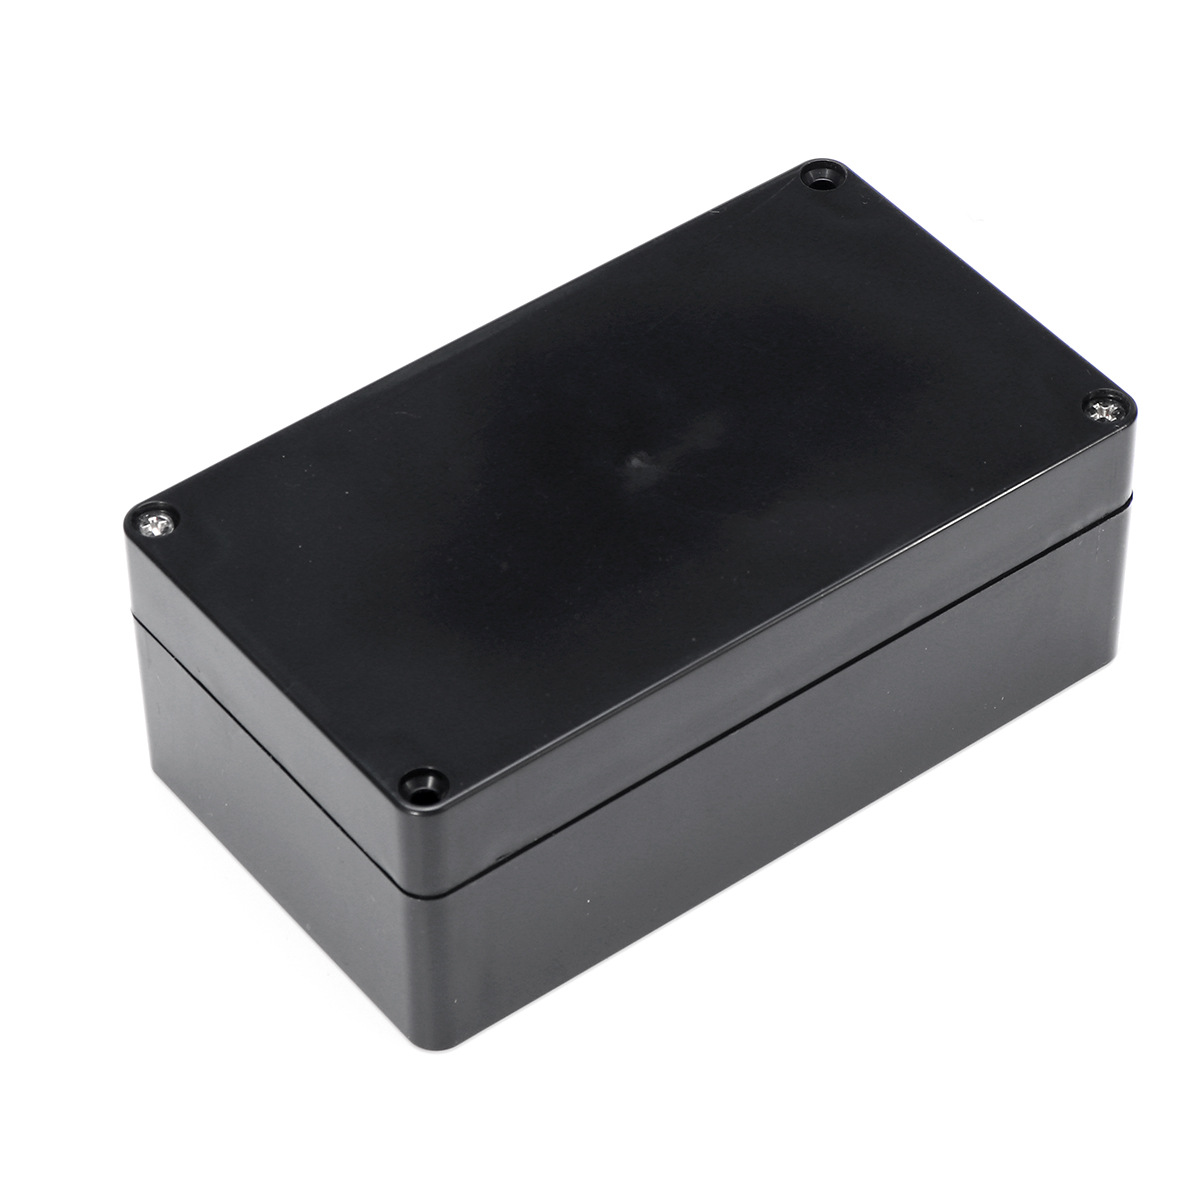 Find ABS Enclosure Box Electronics Components Project Hobby Case With Screws for Sale on Gipsybee.com with cryptocurrencies